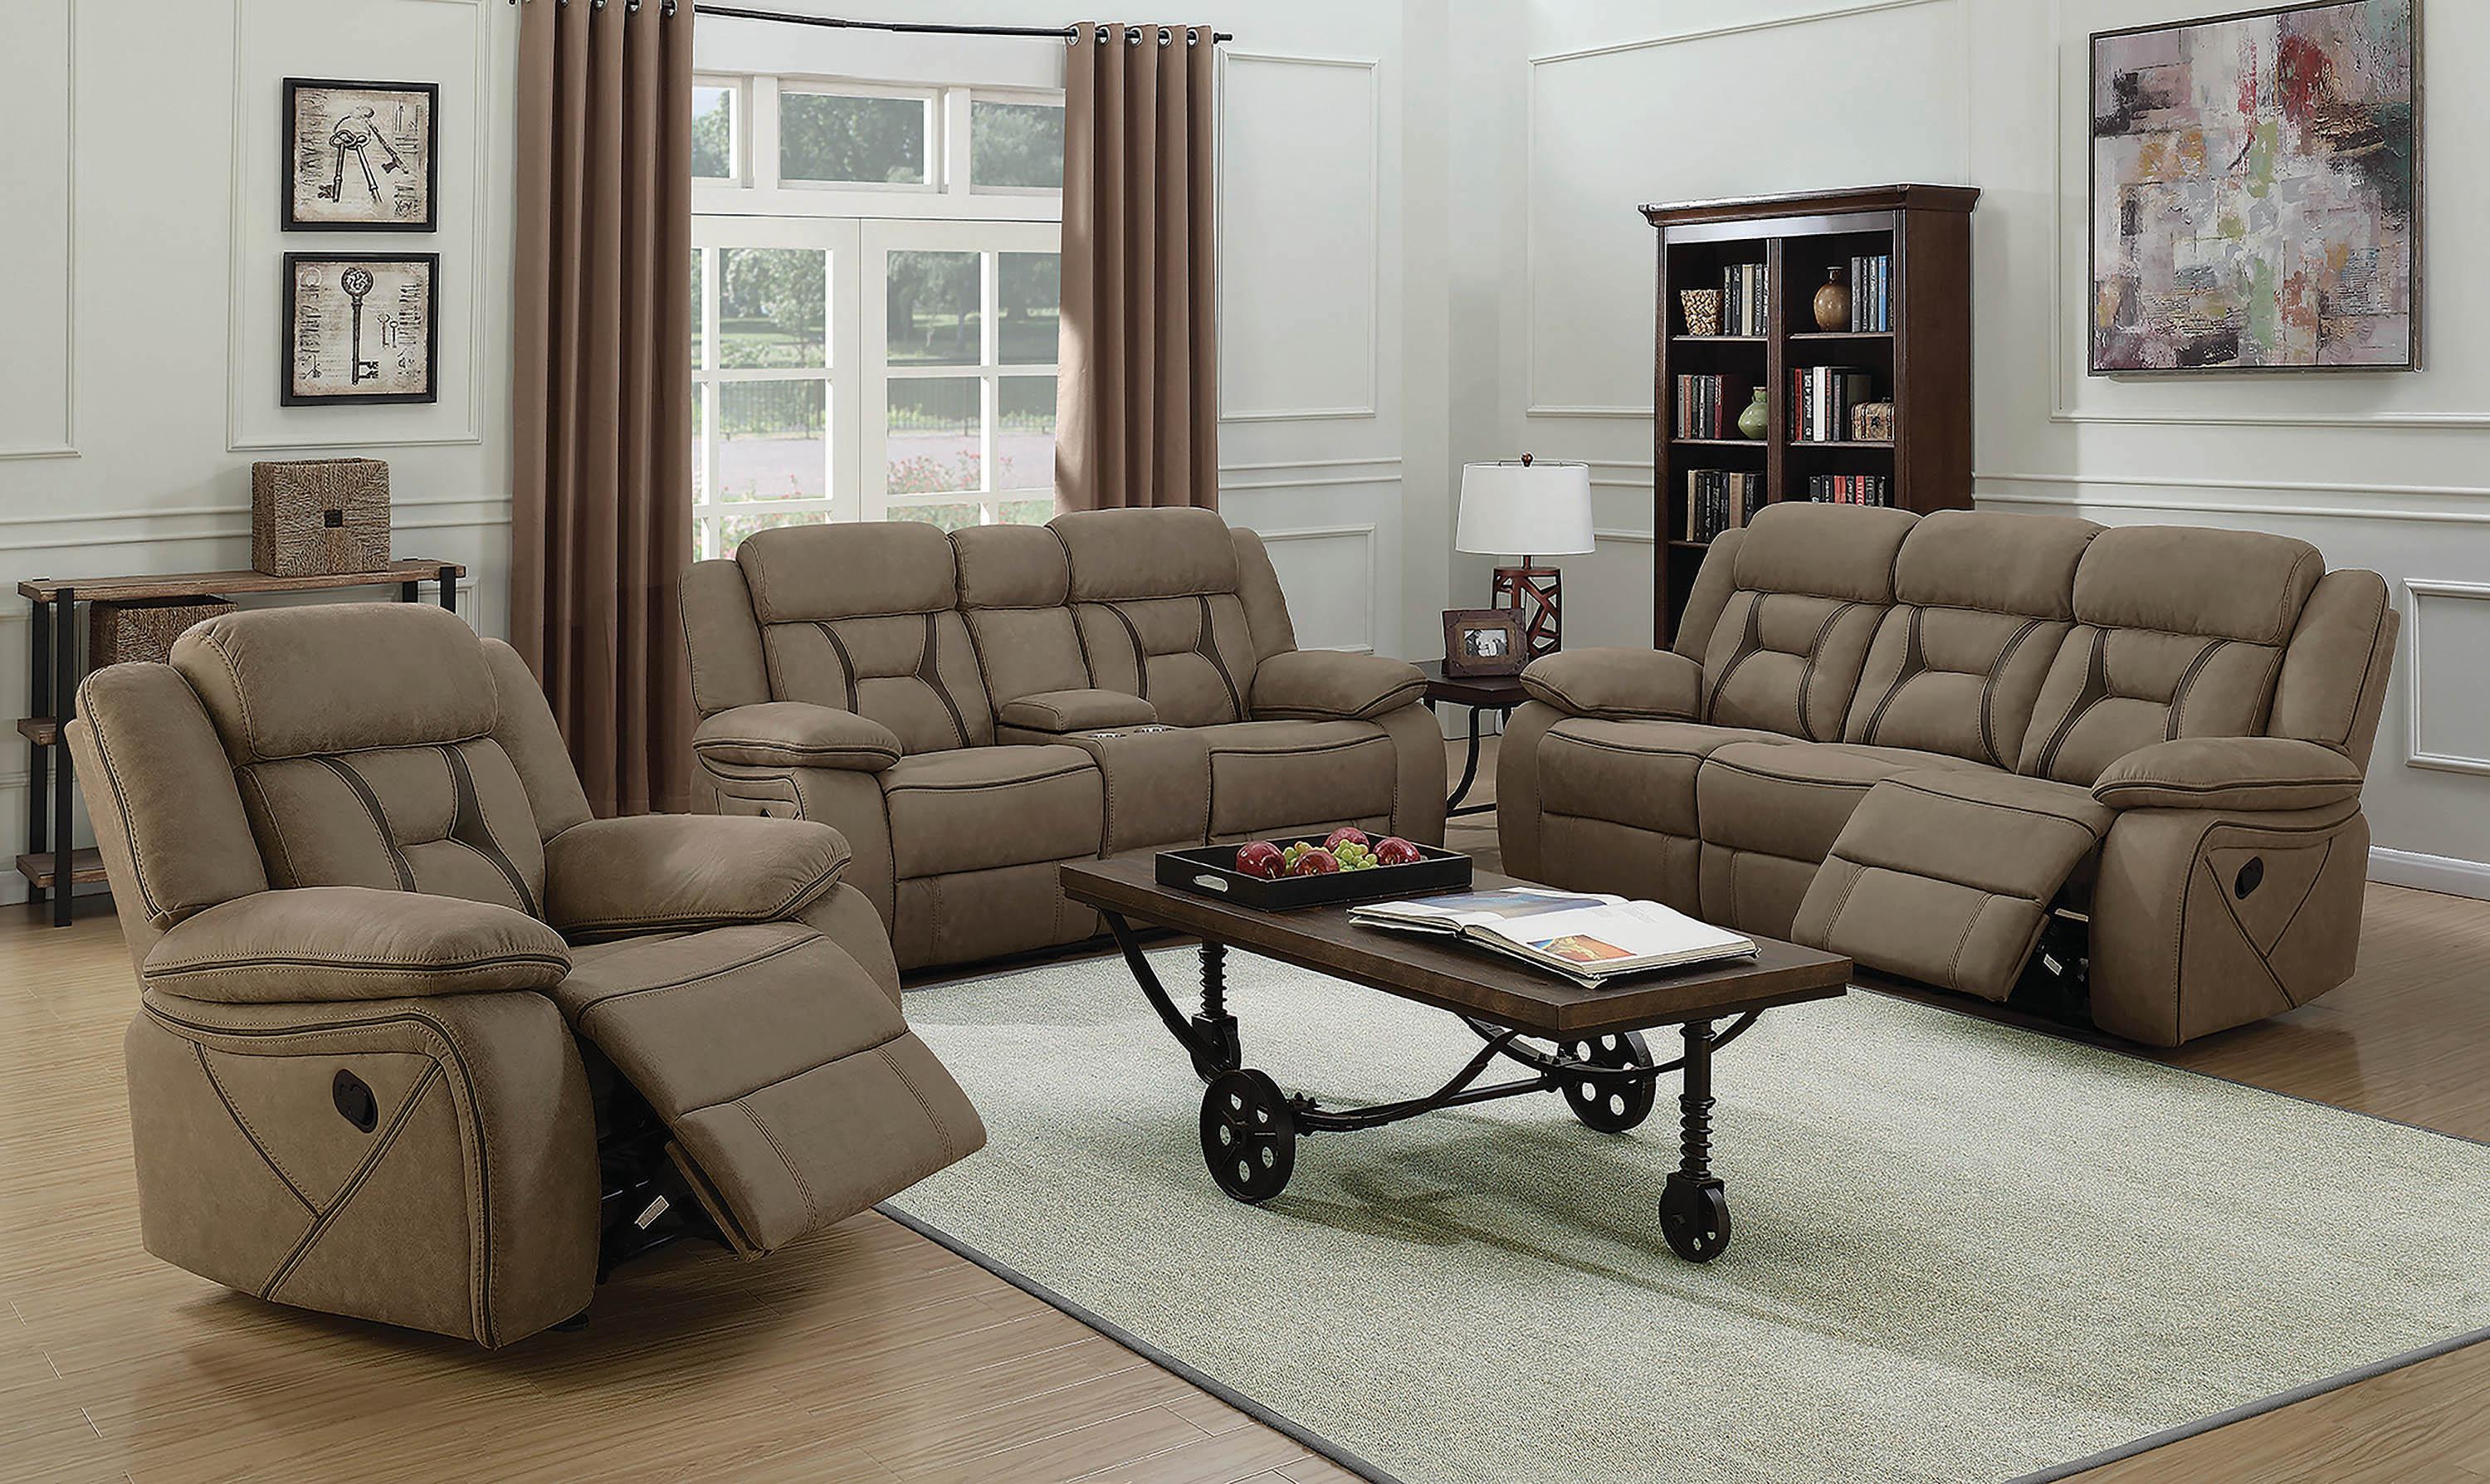 Transitional Reclining Loveseat Houston 602265 in Brown Leather